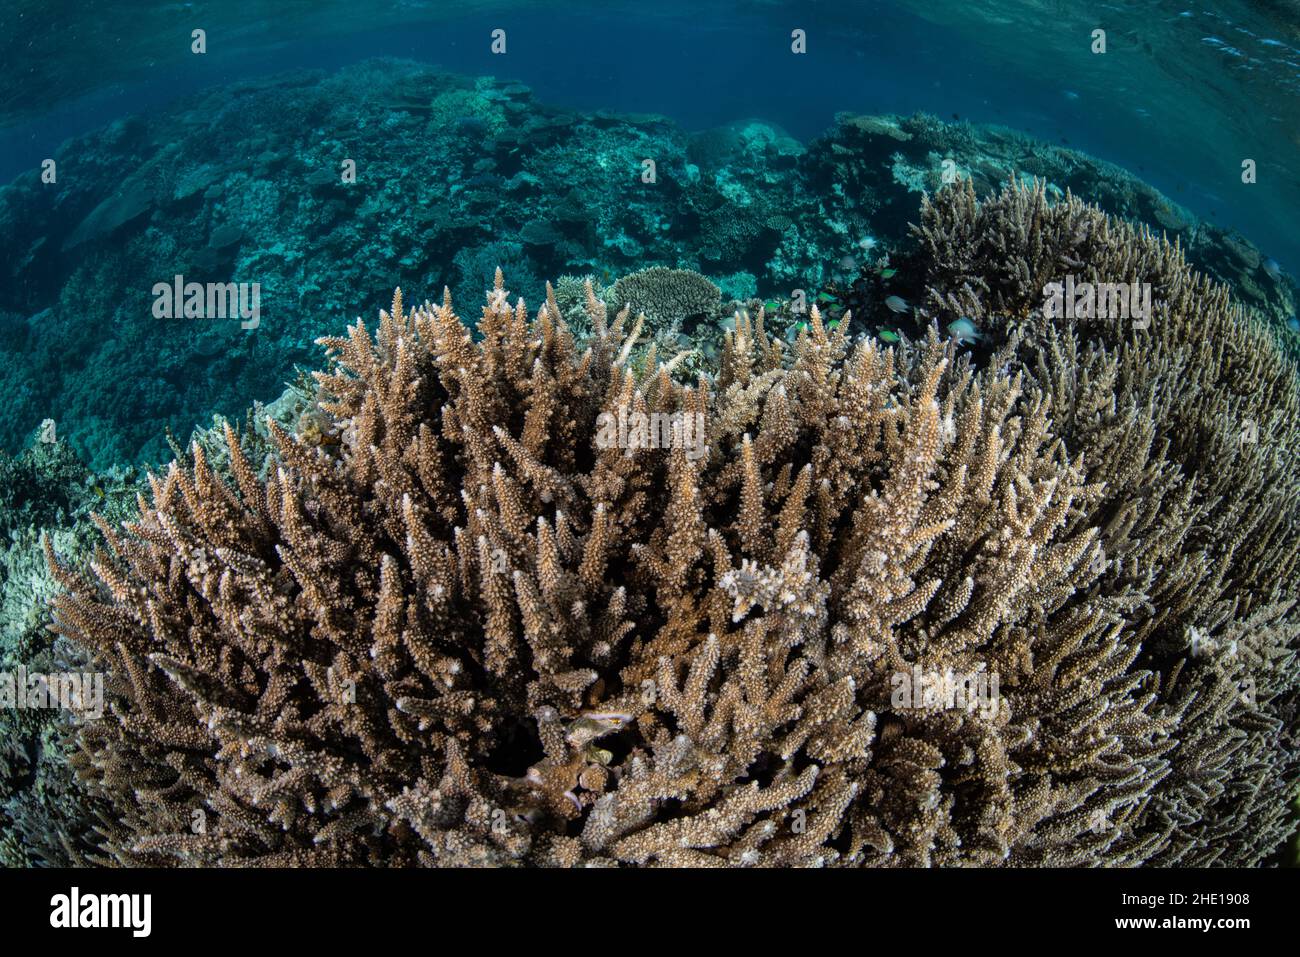 A coral reef with staghorn corals in the red sea off the coast of Hurghada, Egypt. Stock Photo